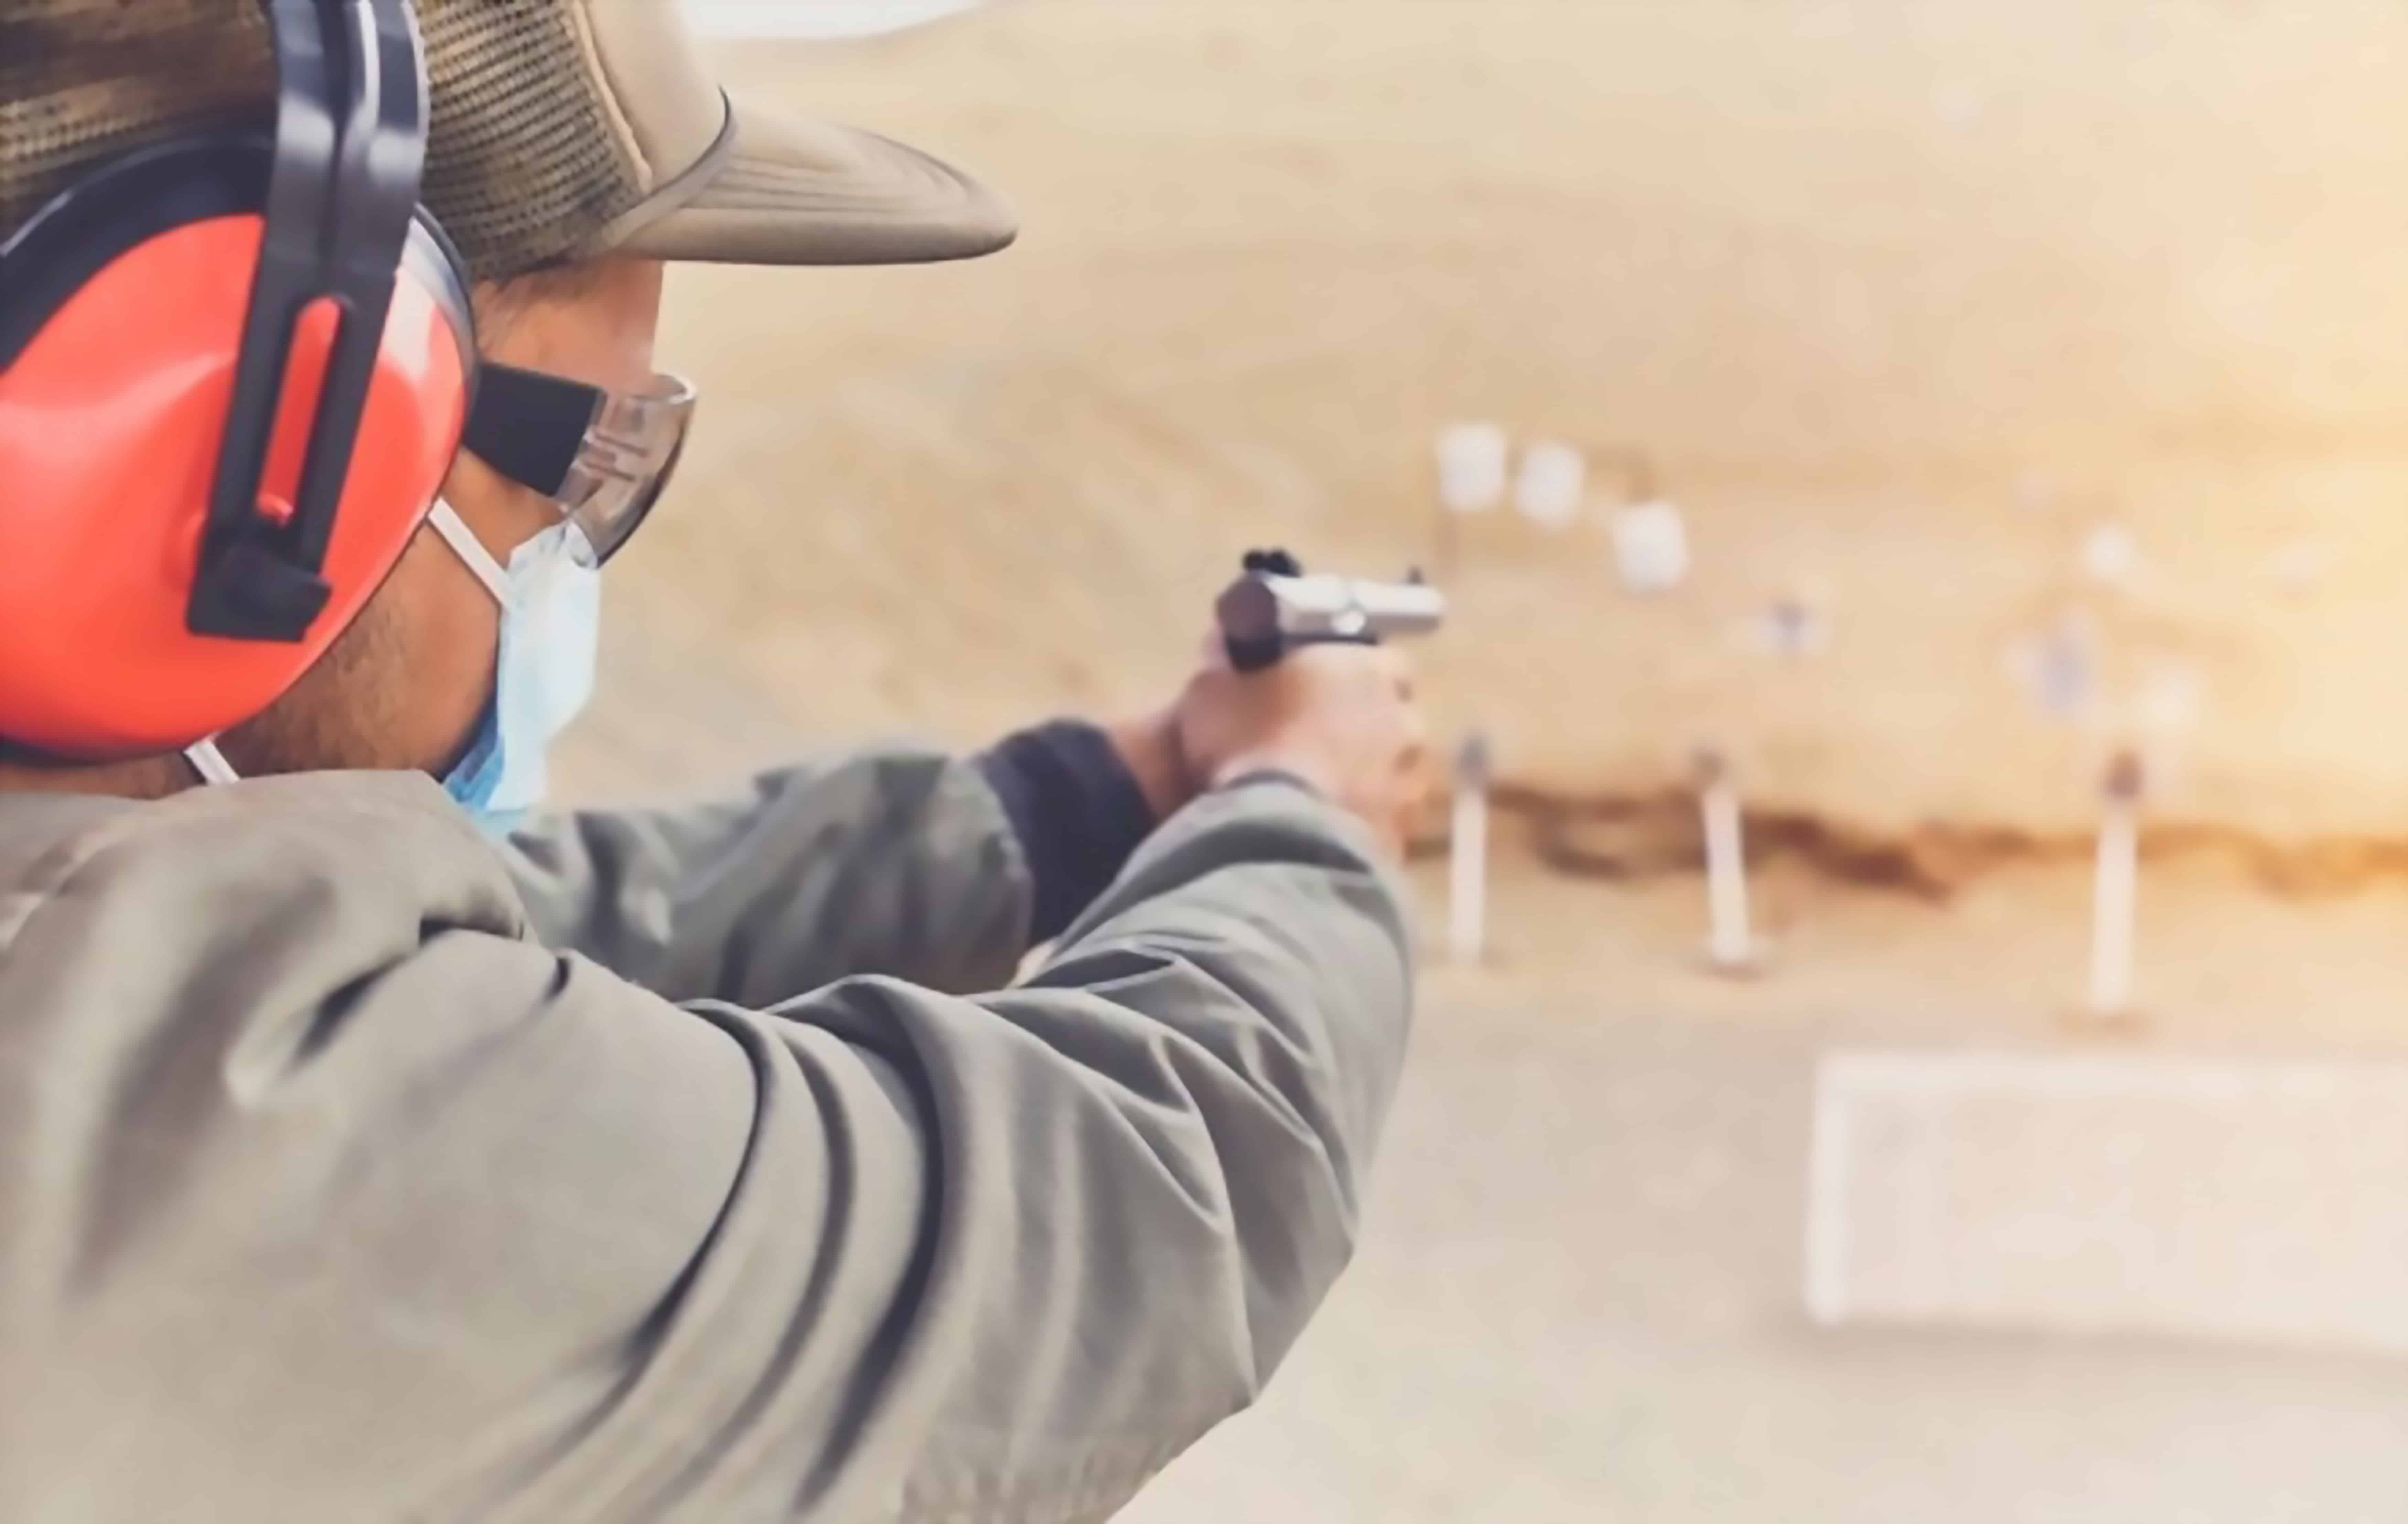 Texas LTC Range Qualification - Concealed Handgun License Texas - Convenient and affordable online CHL training and LTC training